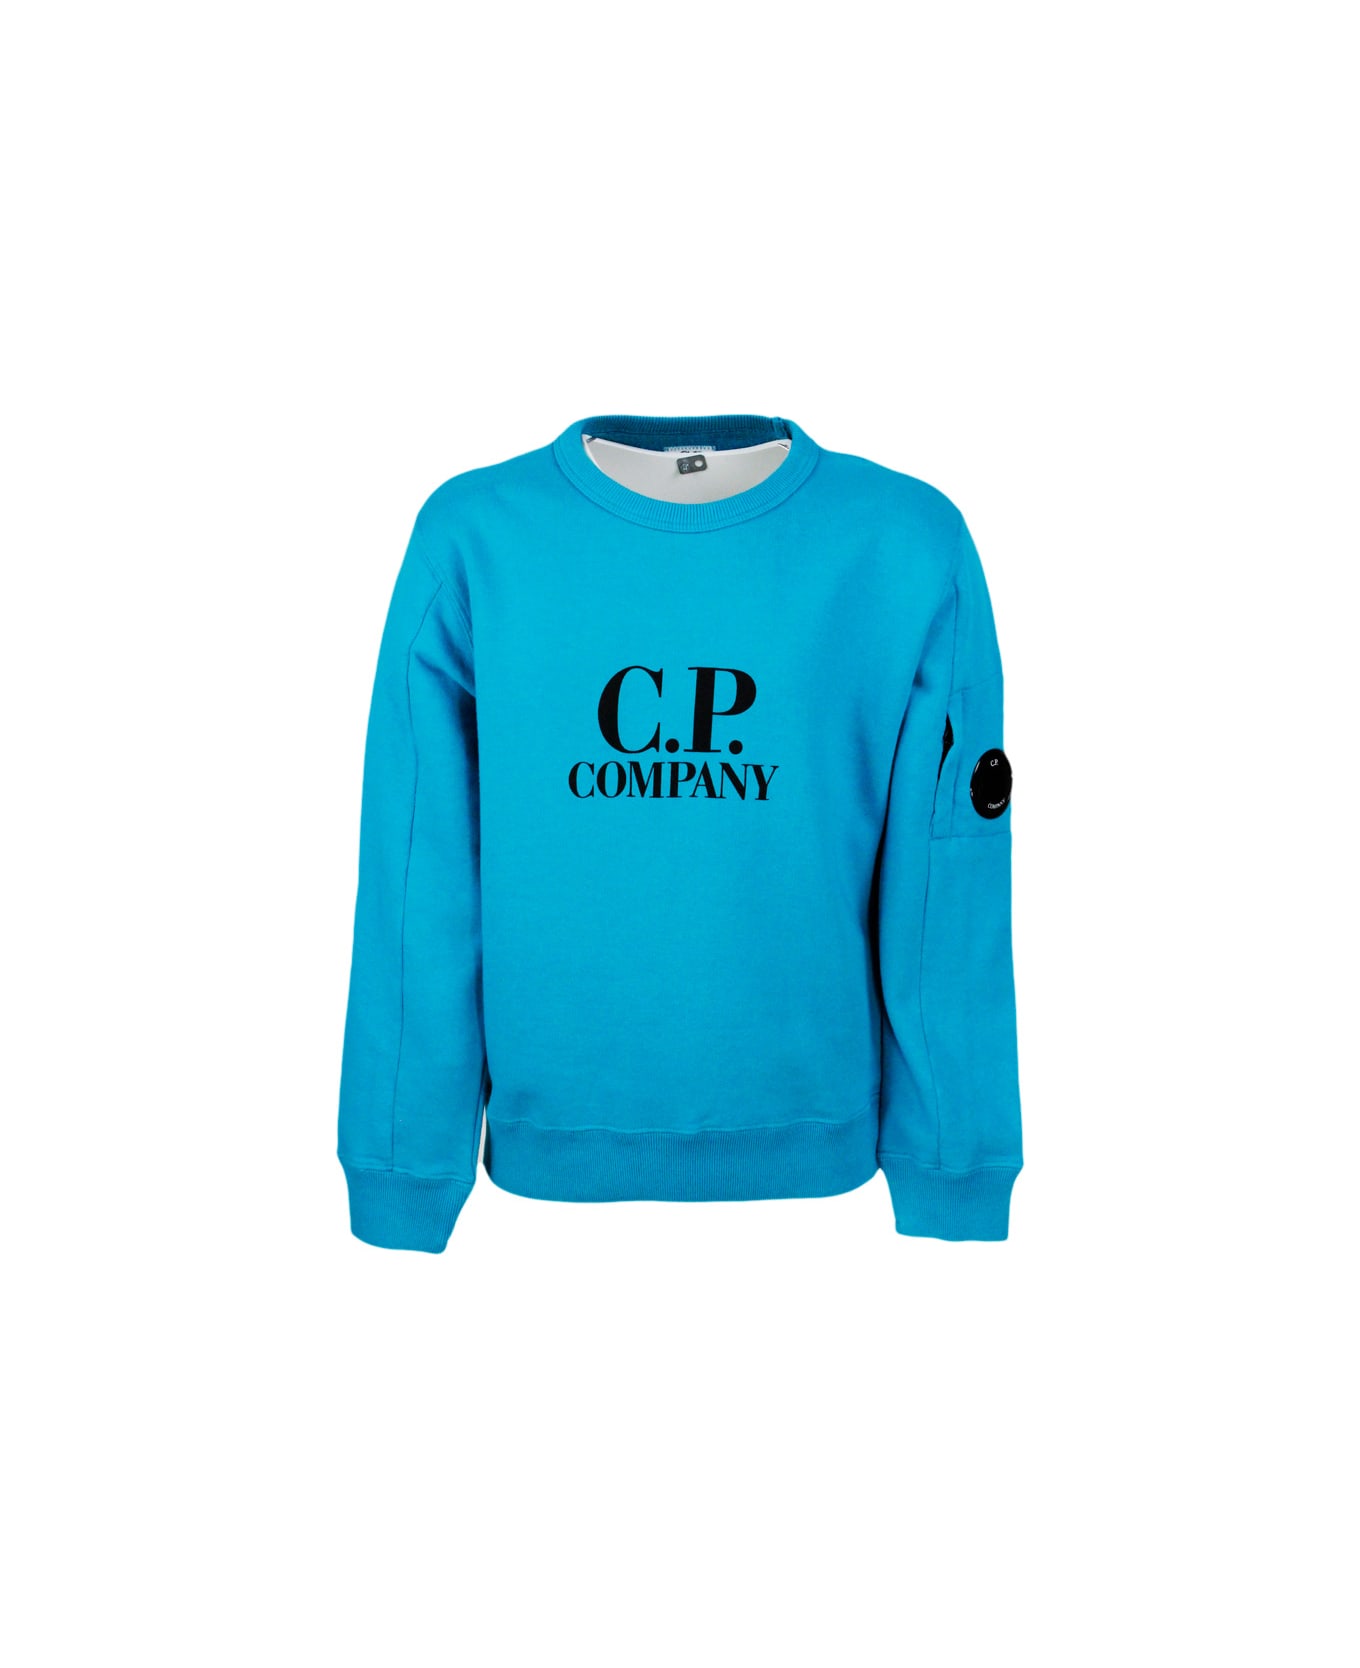 C.P. Company Long-sleeved Crewneck Sweatshirt In Breathable Cotton Fleece With Logo On The Chest And Eyeglass Lens On The Shoulder - Blu royal